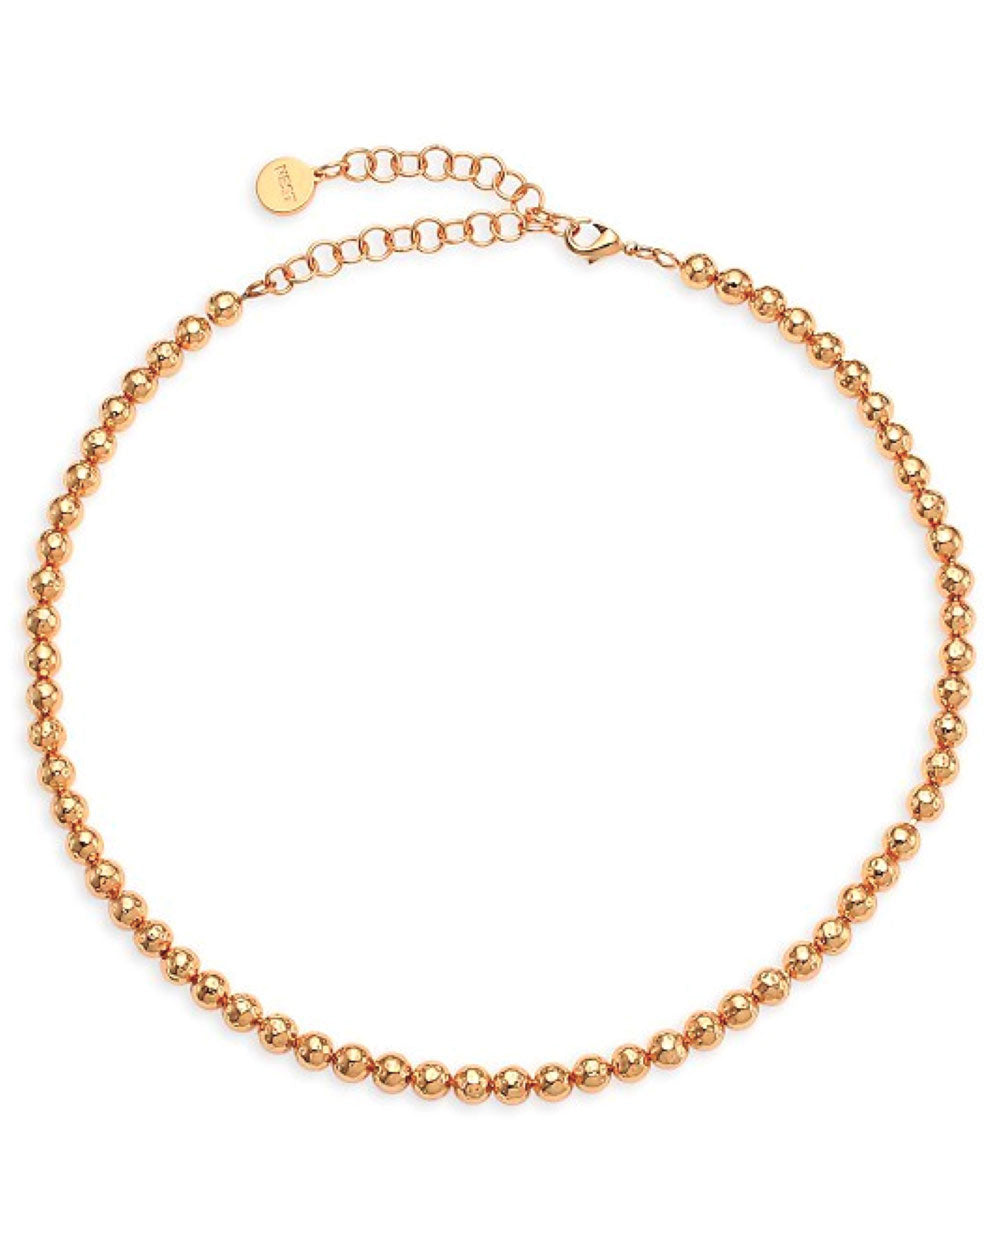 Hammered Gold Bead Short Necklace